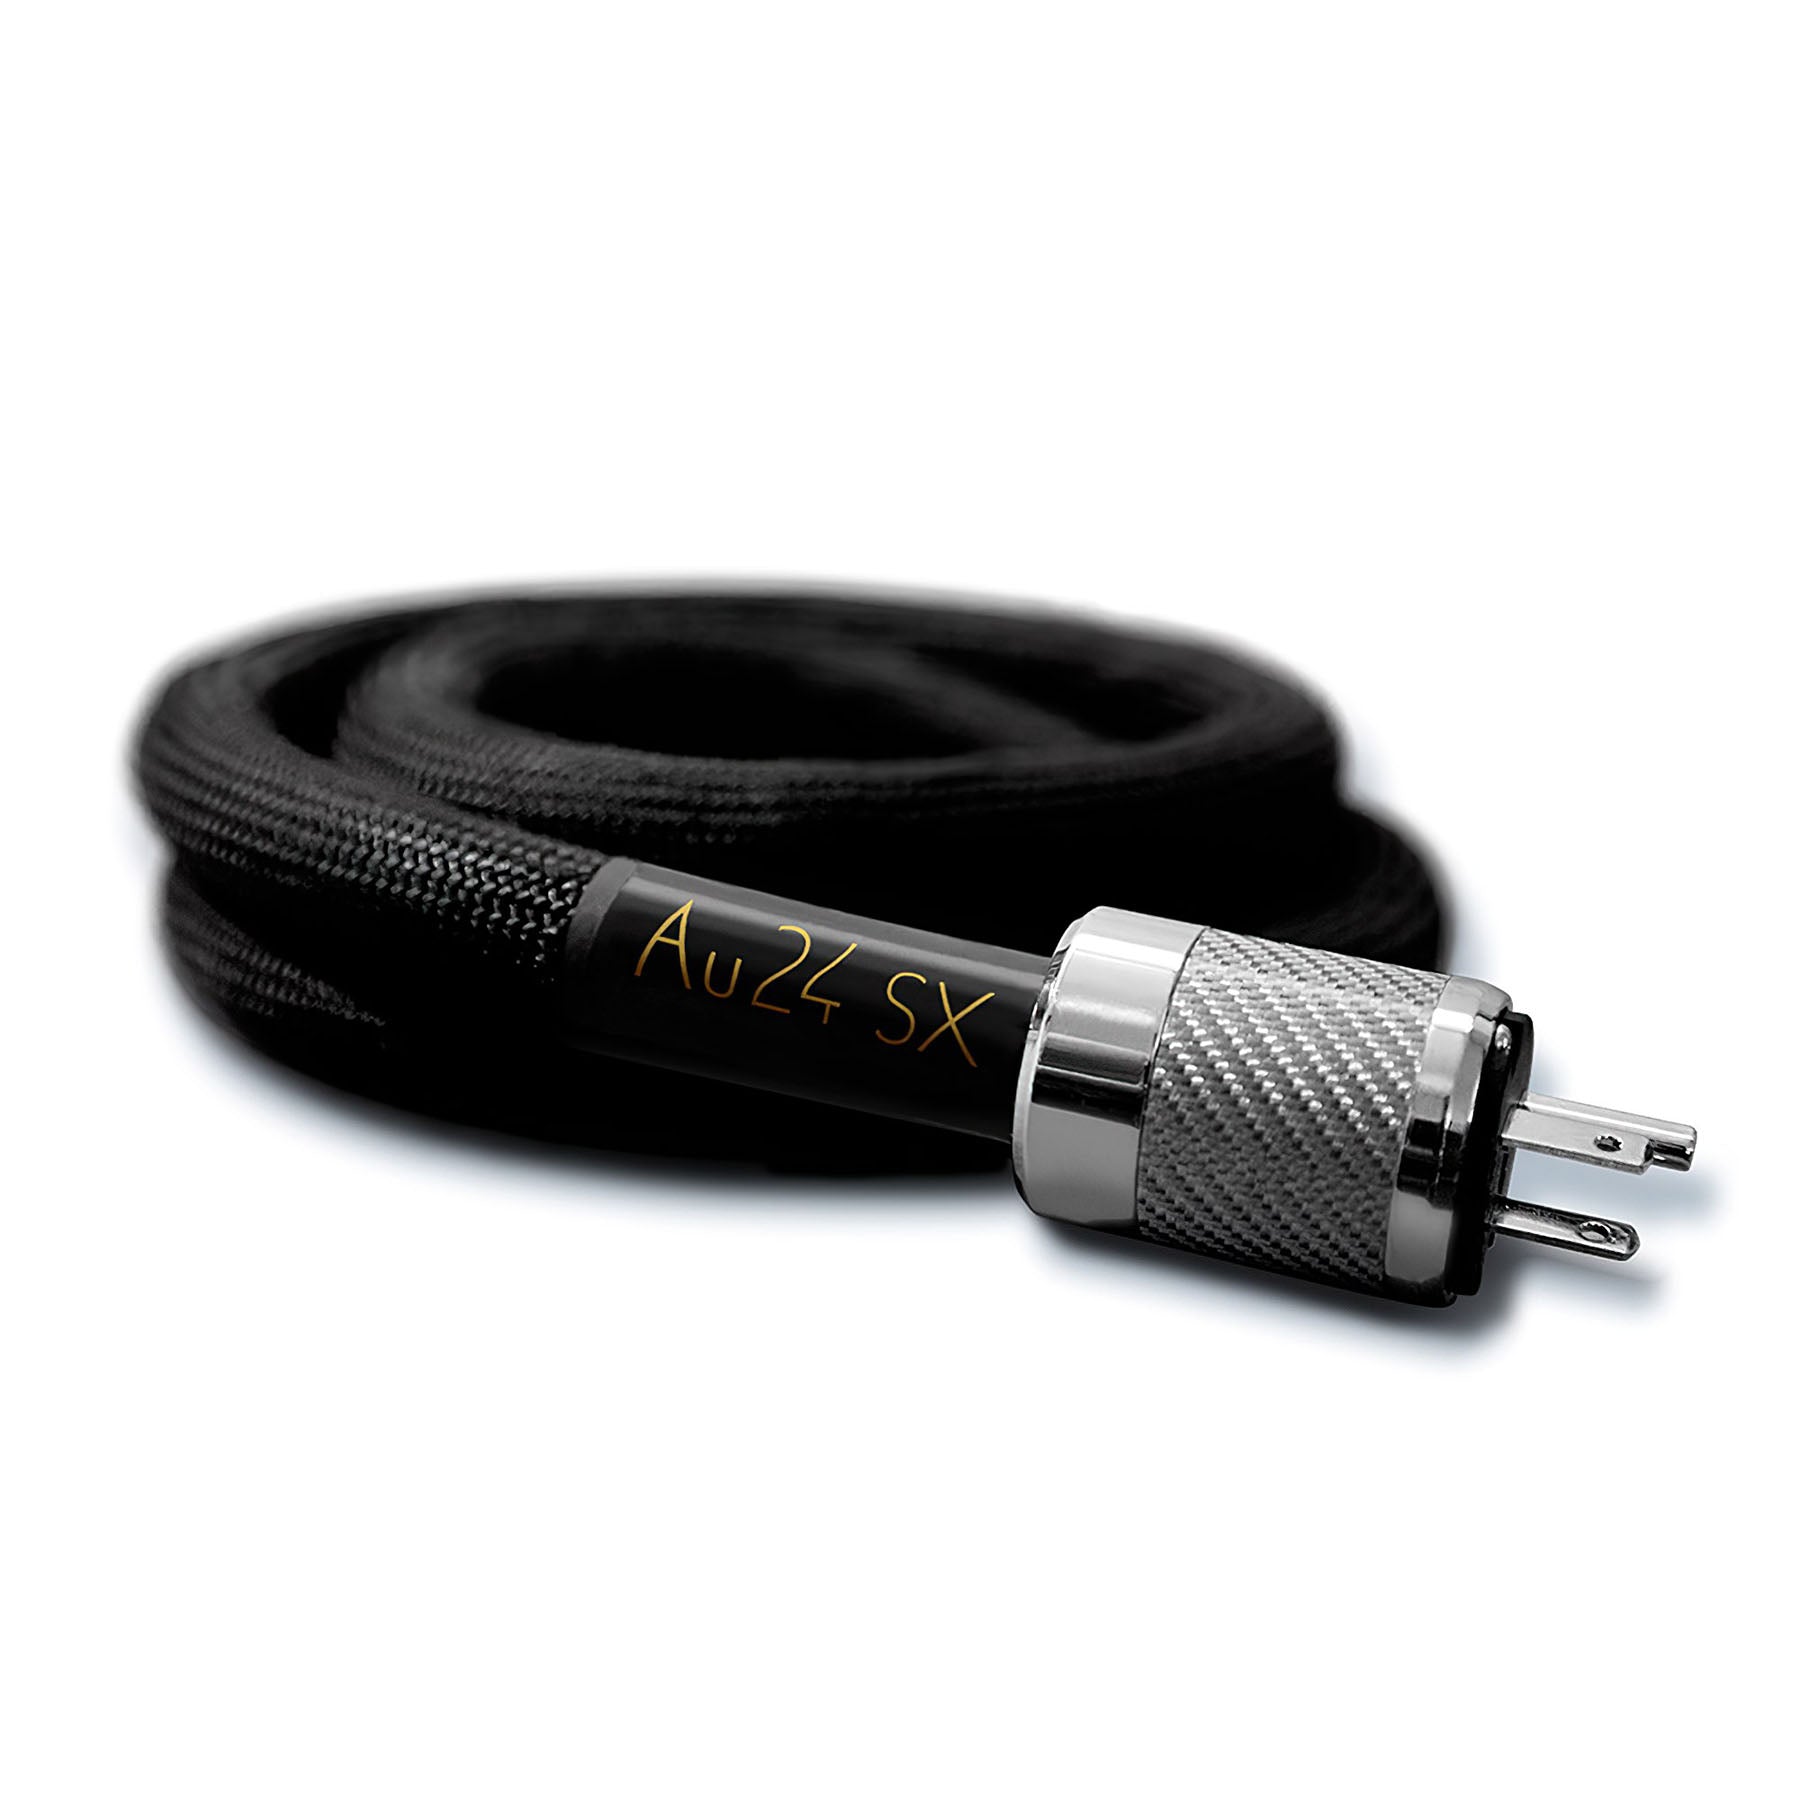 Audience Au24 SX 10 AWG AUS-IEC PowerChord Reference Power Cable